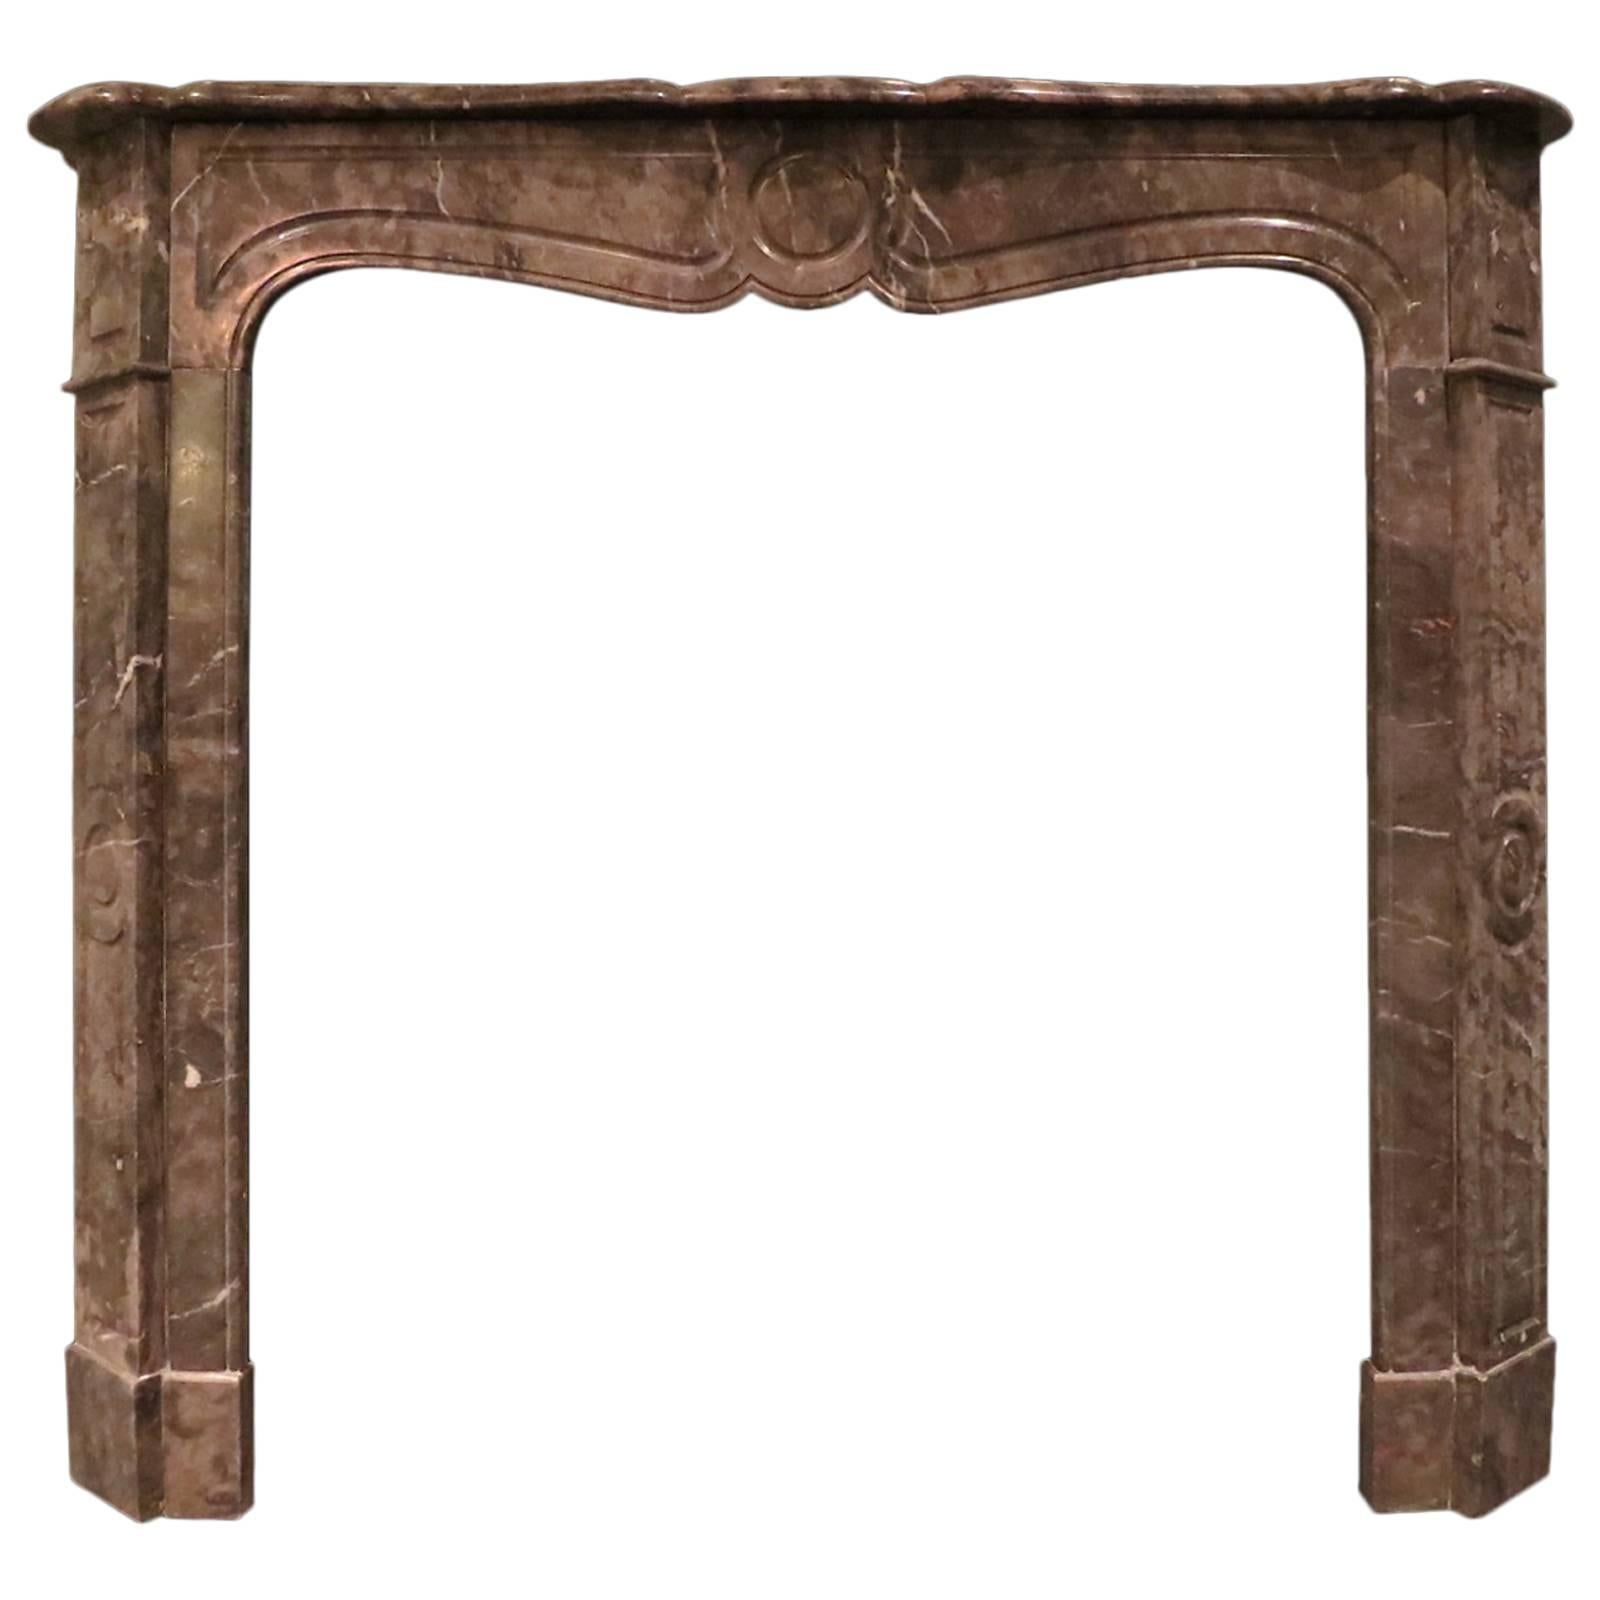 19th Century Pompadour Style French Fireplace